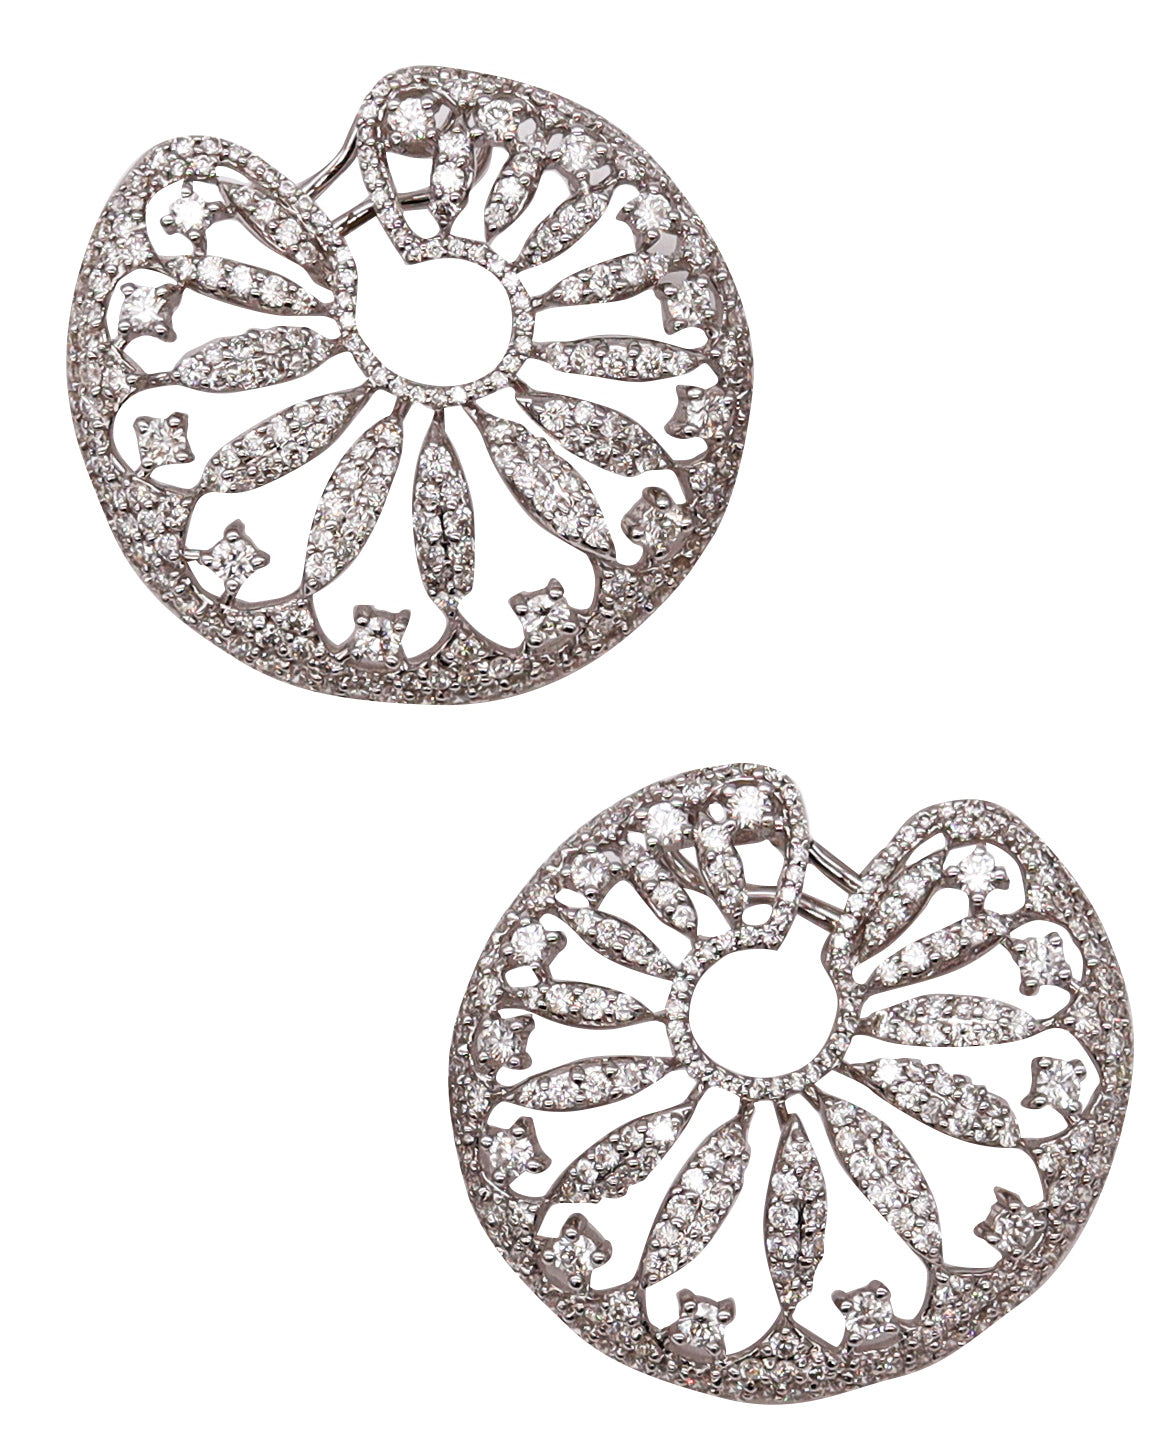 Salavetti Milano Clip-Earrings 18Kt White Gold With 6.38 Cts In VVS Diamonds